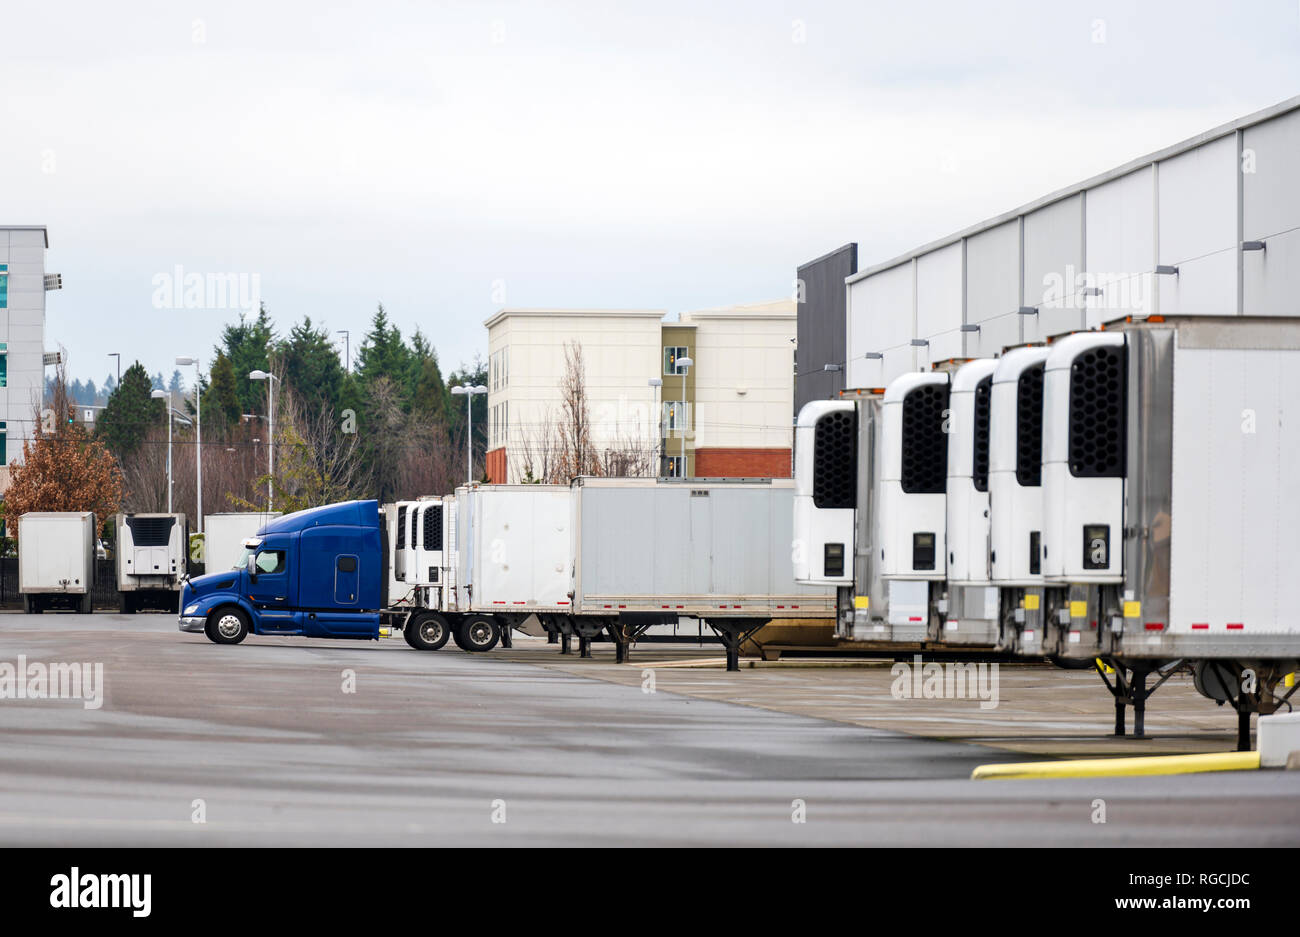 Big rig blue semi truck and refrigerated semi trailers standing in row in warehouse dock for loading and unloading commercial cargo and continuing go  Stock Photo